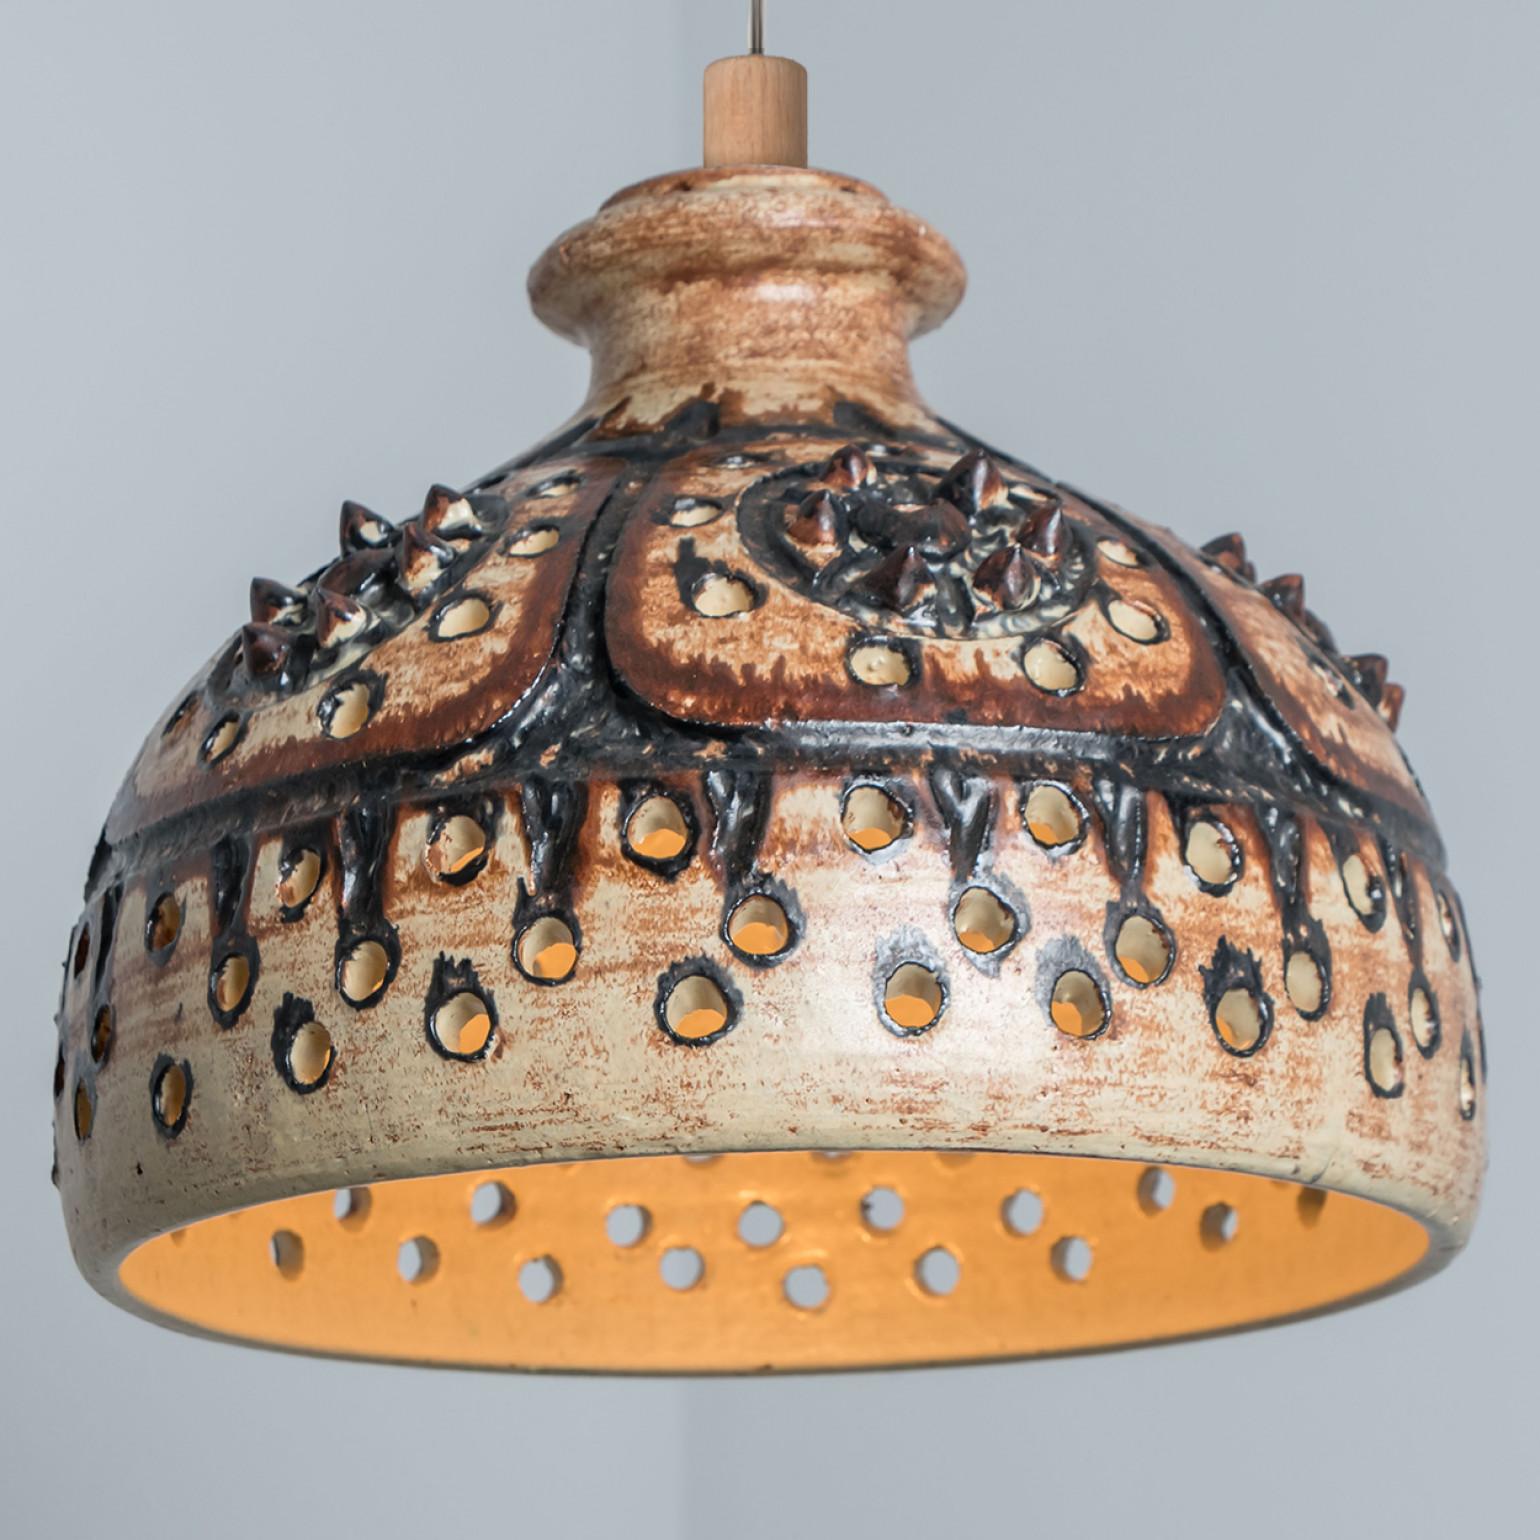 Other 1 of 3 Cone Brown Ceramic Pendant Lights, Denmark, 1970 For Sale